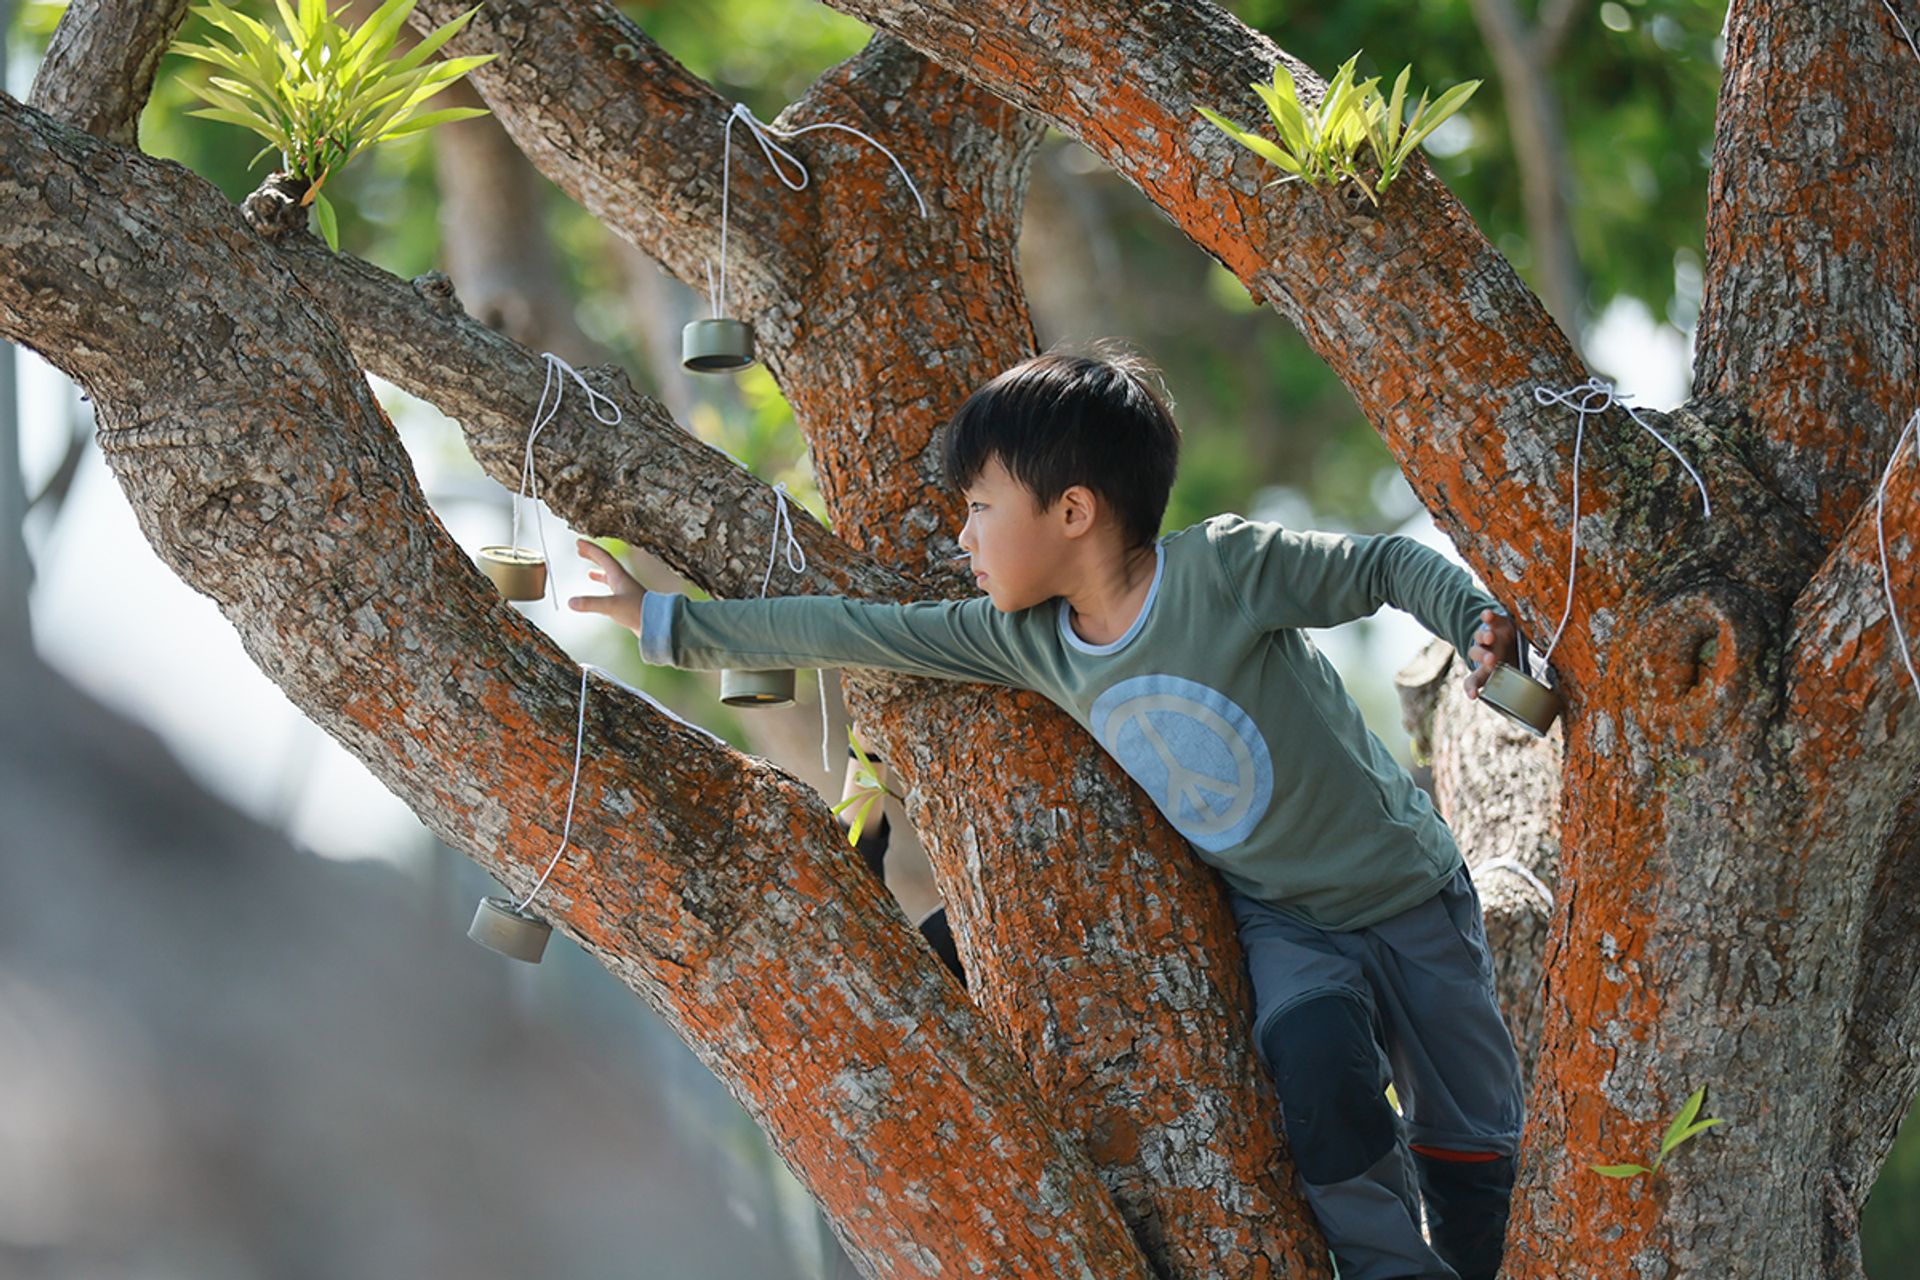 Tyler Foo climbs a tree and reaches for a hanging can during an outdoor challenge.